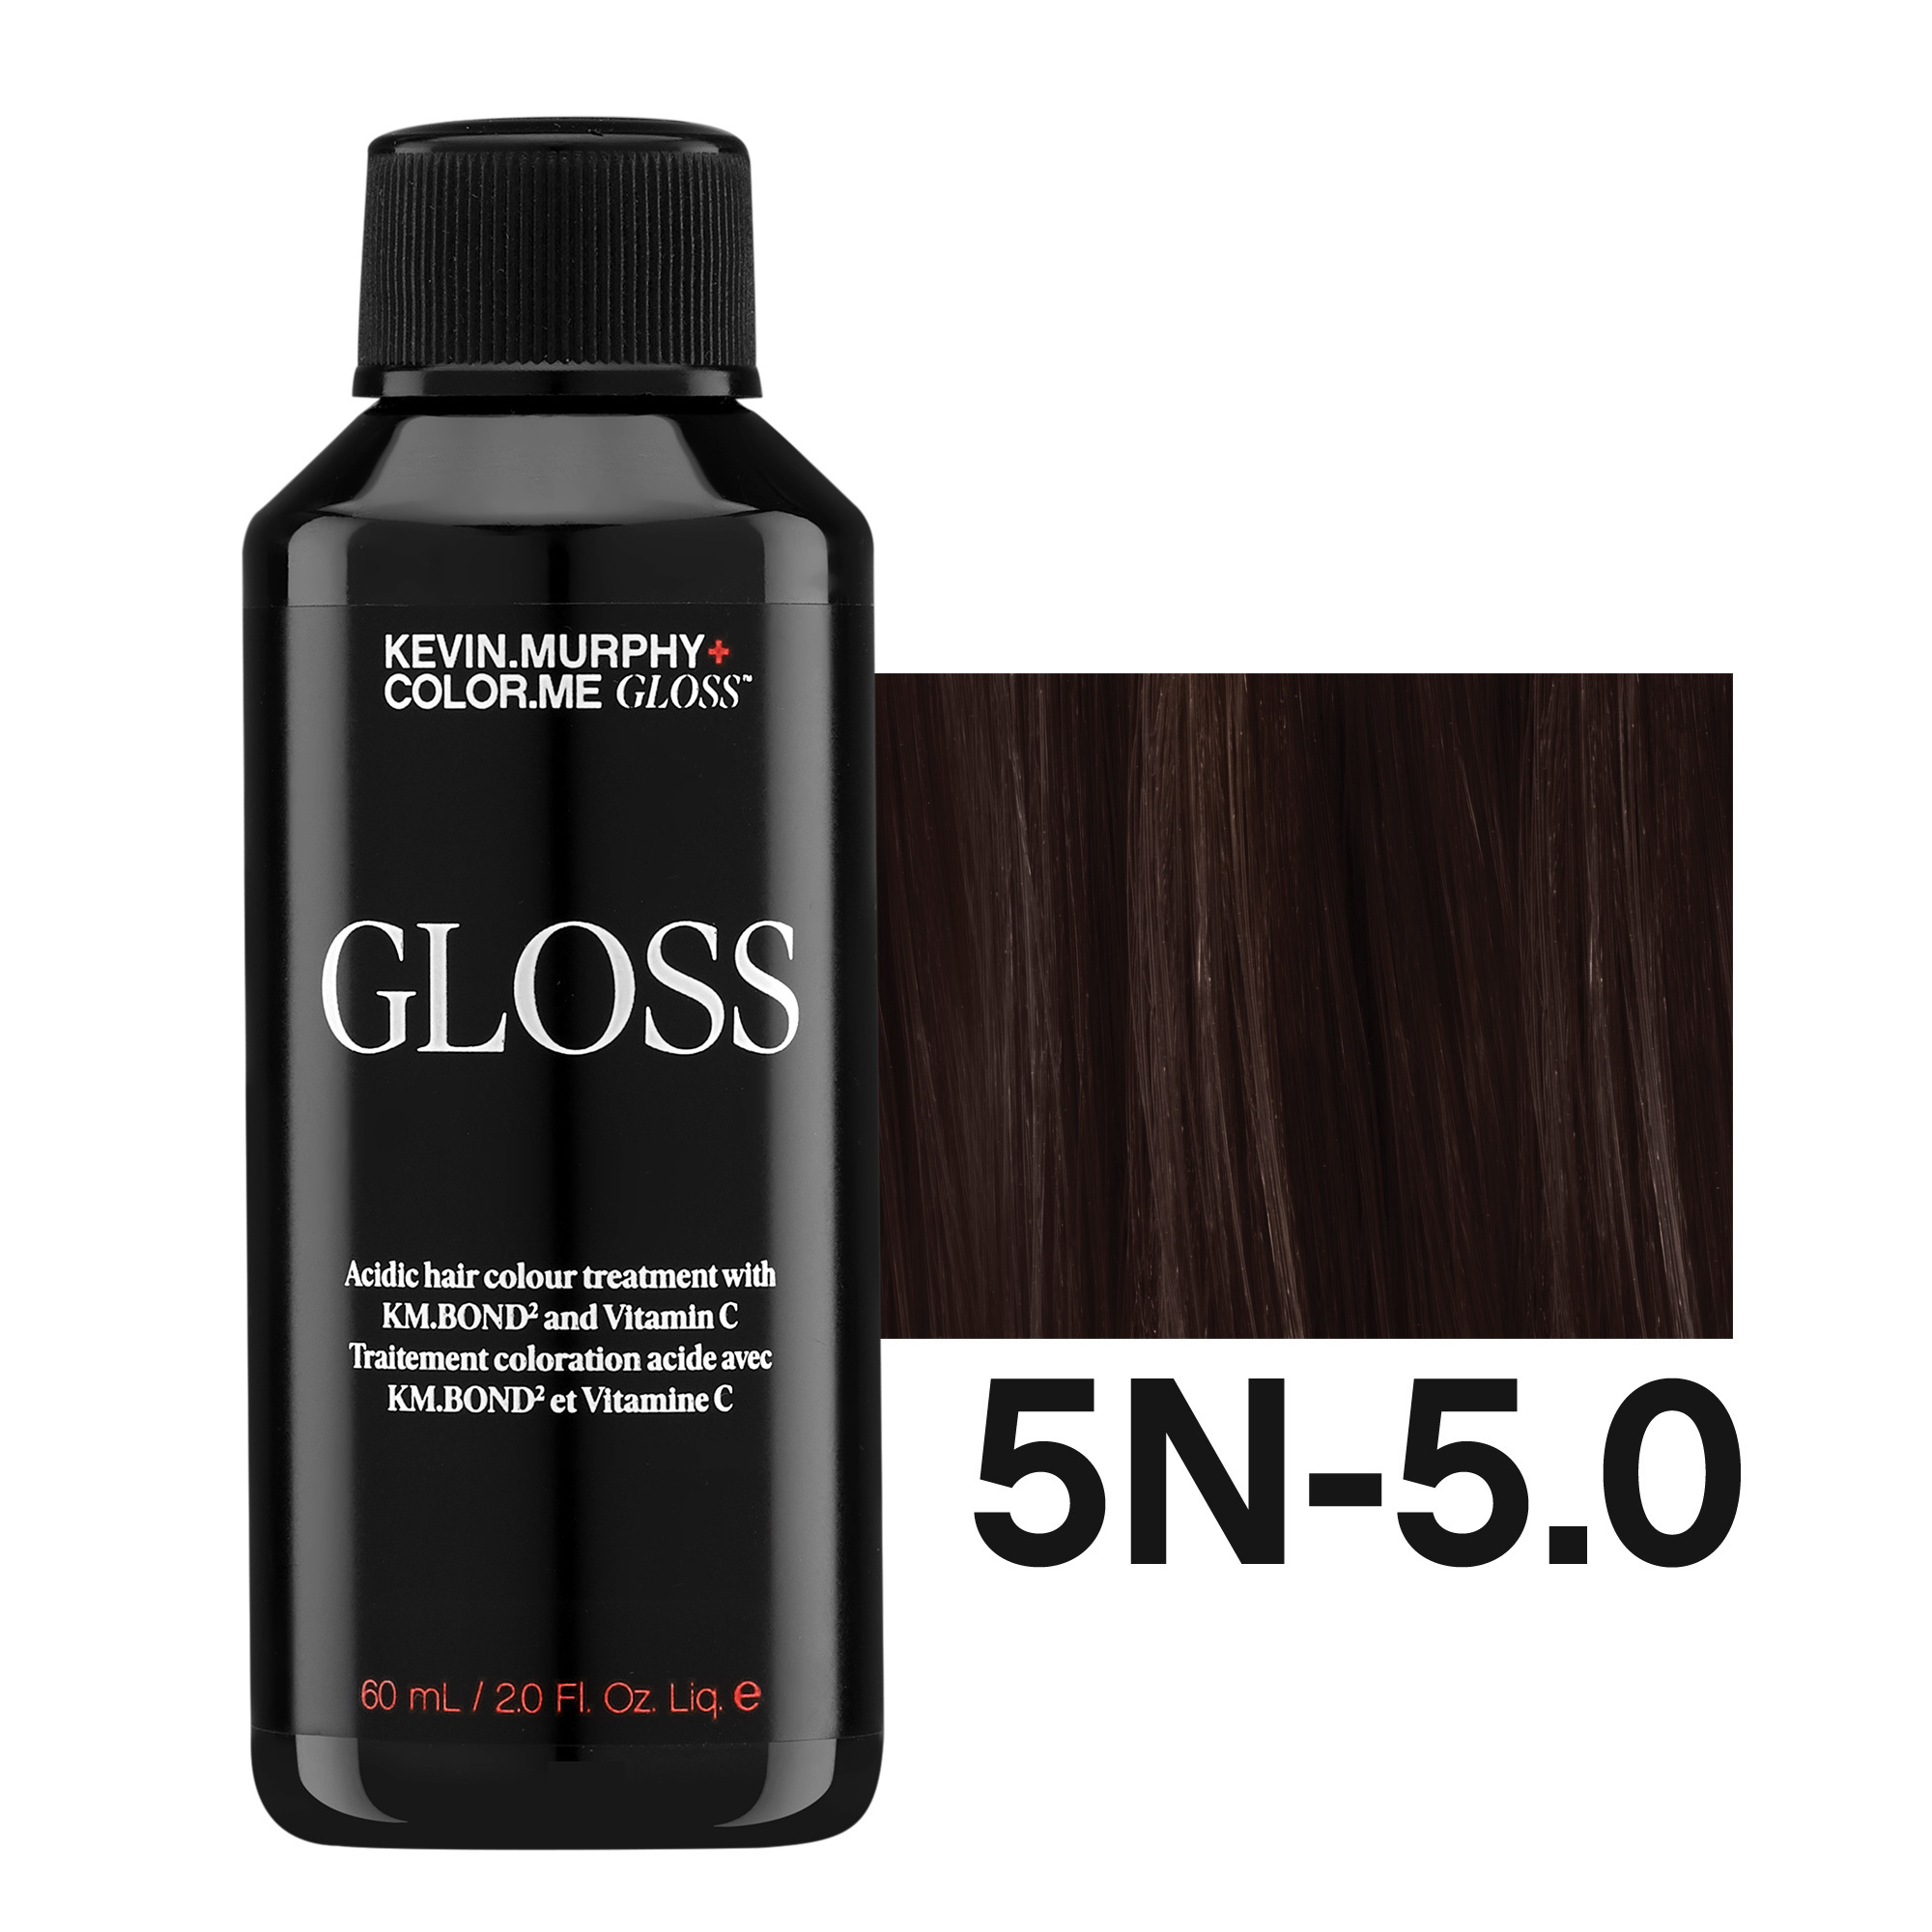 KEVIN.MURPHY COLOR.ME GLOSS 5N - 5.0 Light Brown Natural